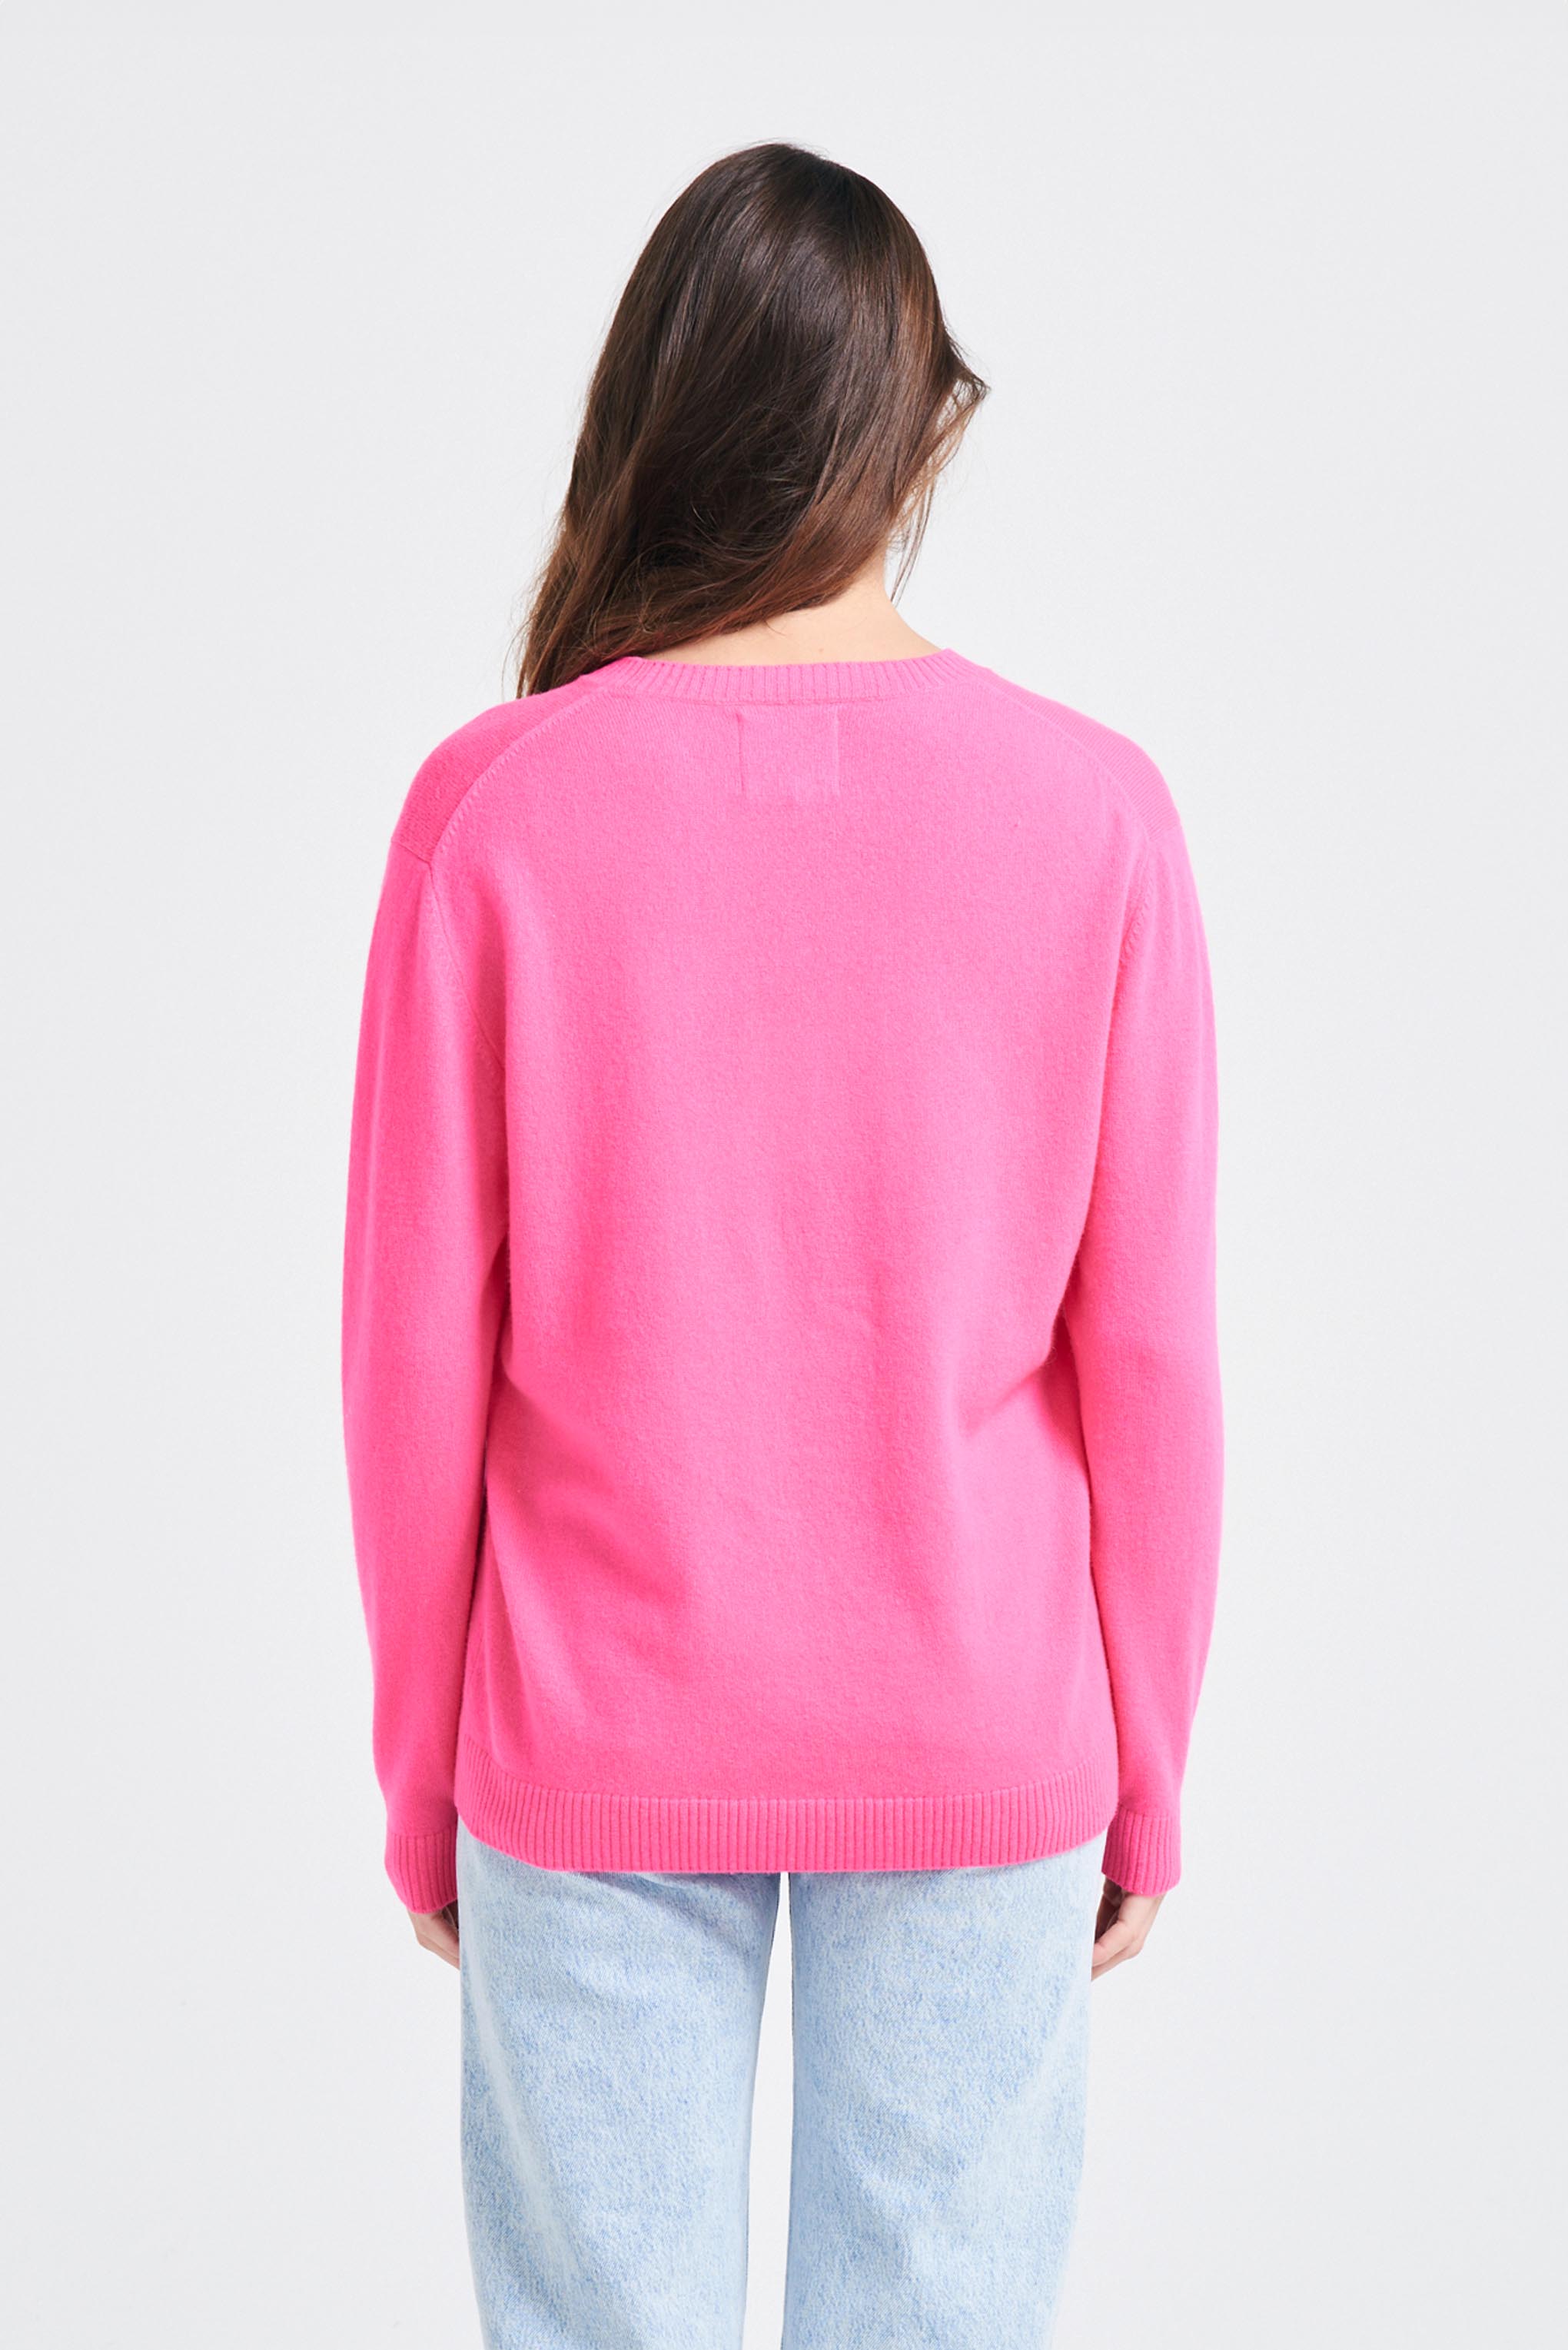 Brown haired female model wearing Jumper1234 Boyfriend fit cashmere crew neck jumper in neon pink facing away from the camera